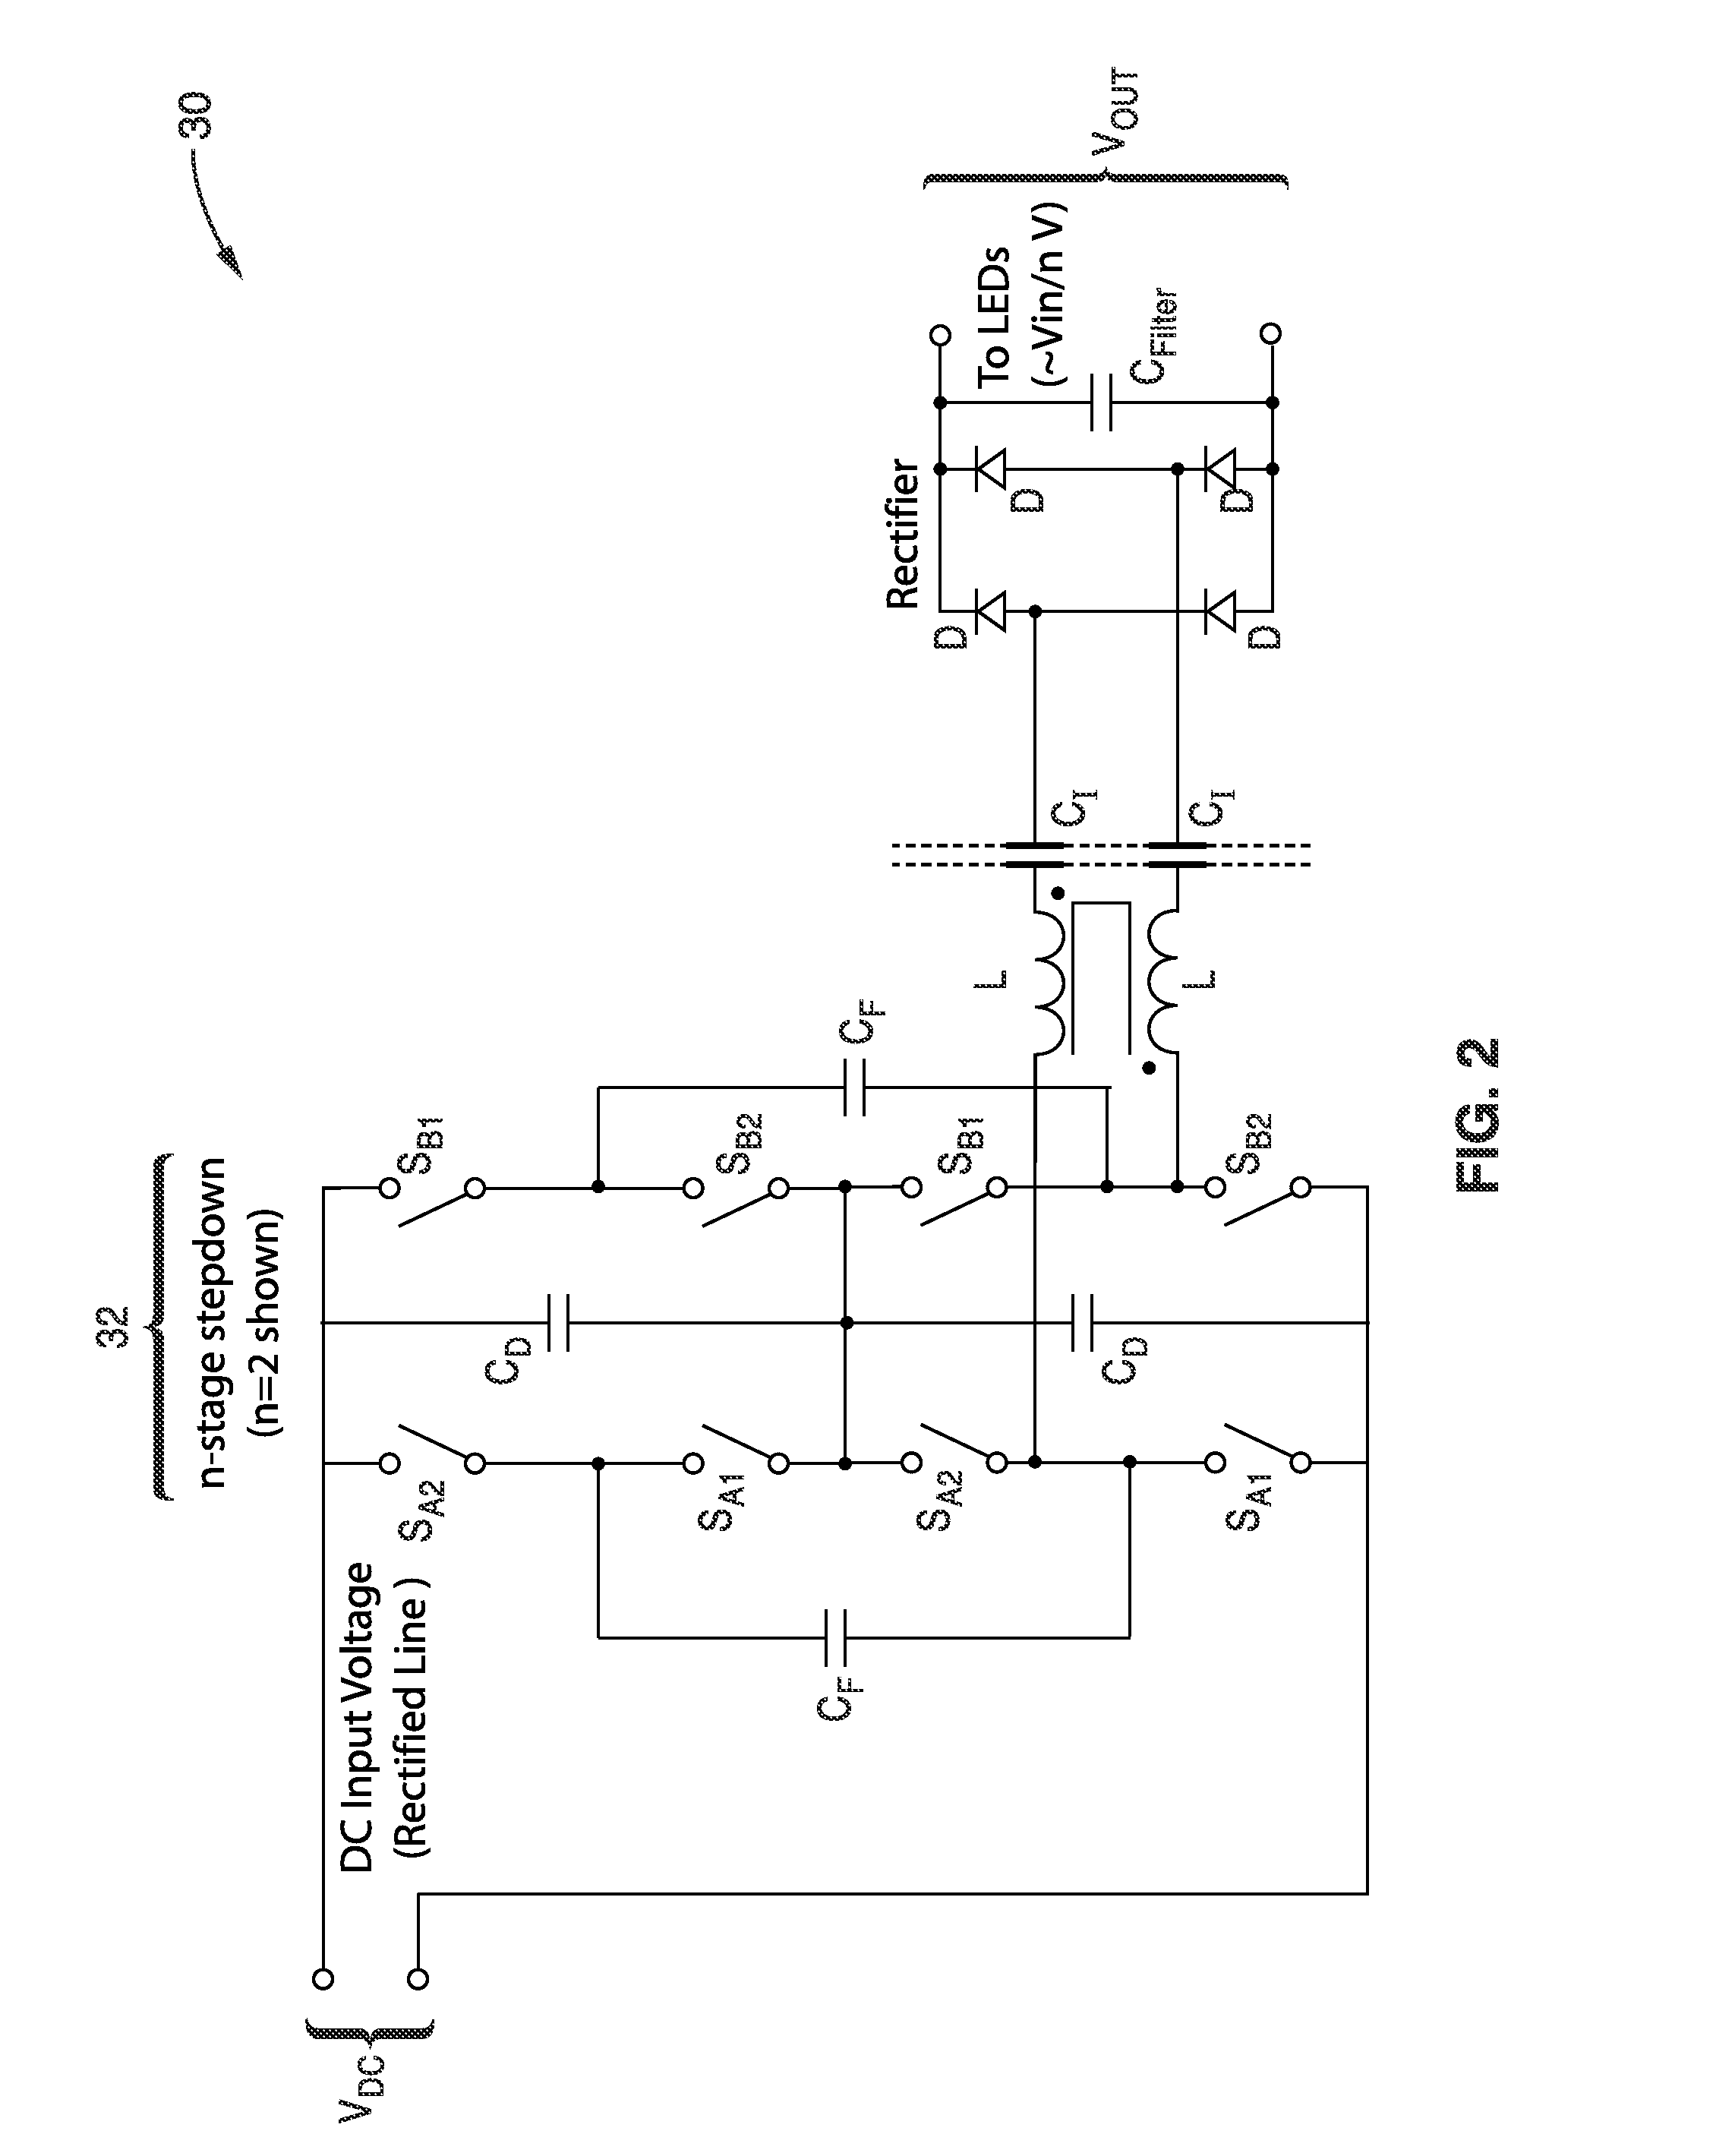 Switched-capacitor isolated LED driver